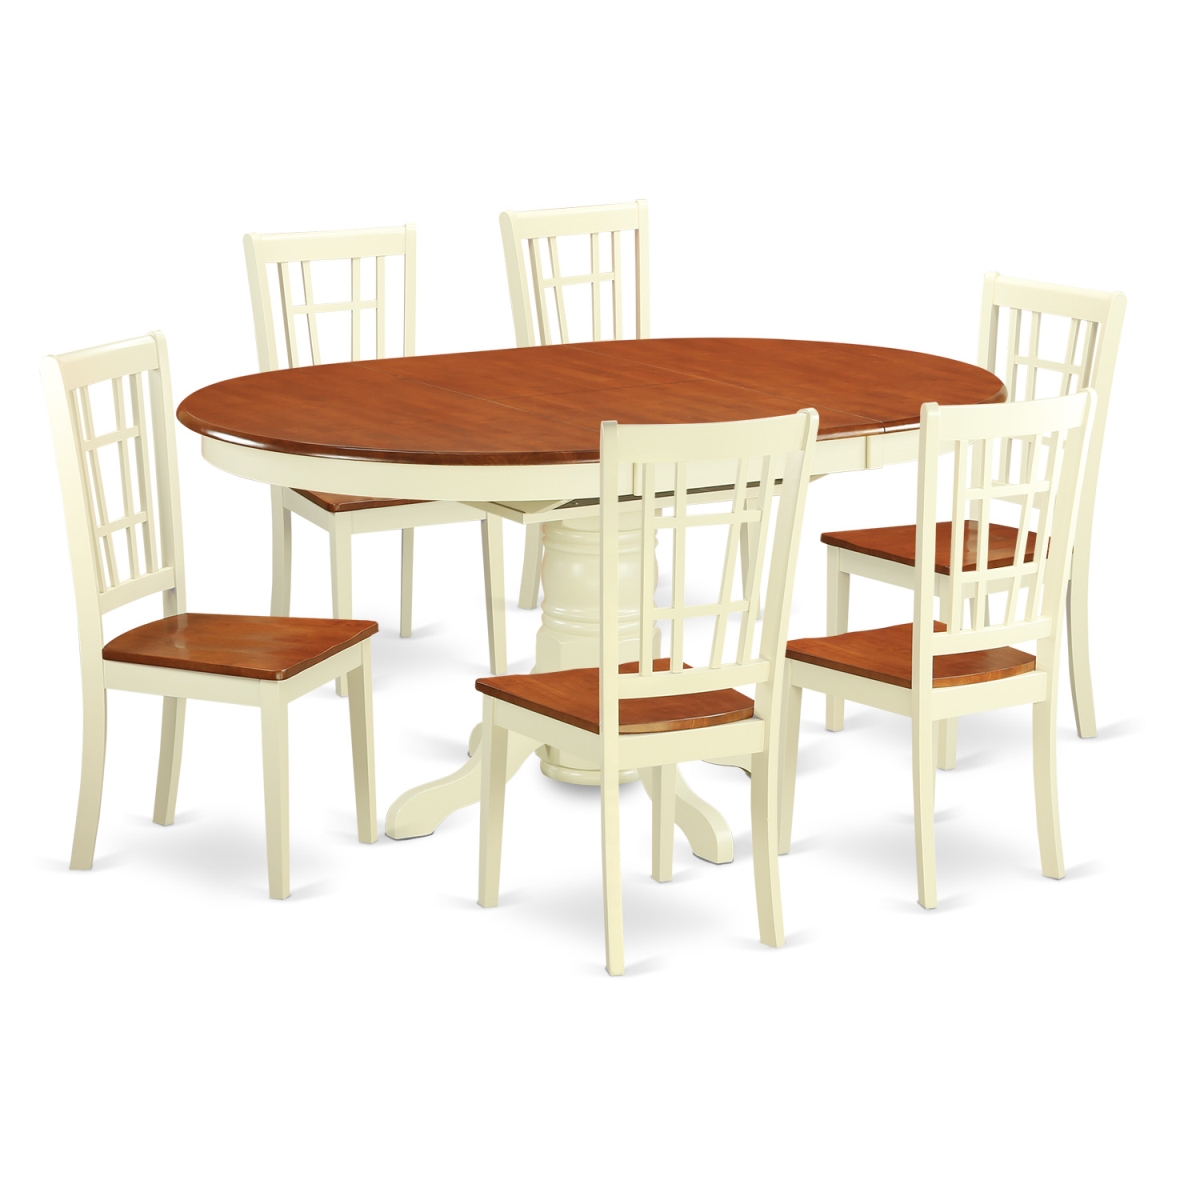 KENI7-WHI-W Dining Table Set - Small Kitchen Table & 6 Chairs, Buttermilk & Cherry - 7 Piece -  East West Furniture